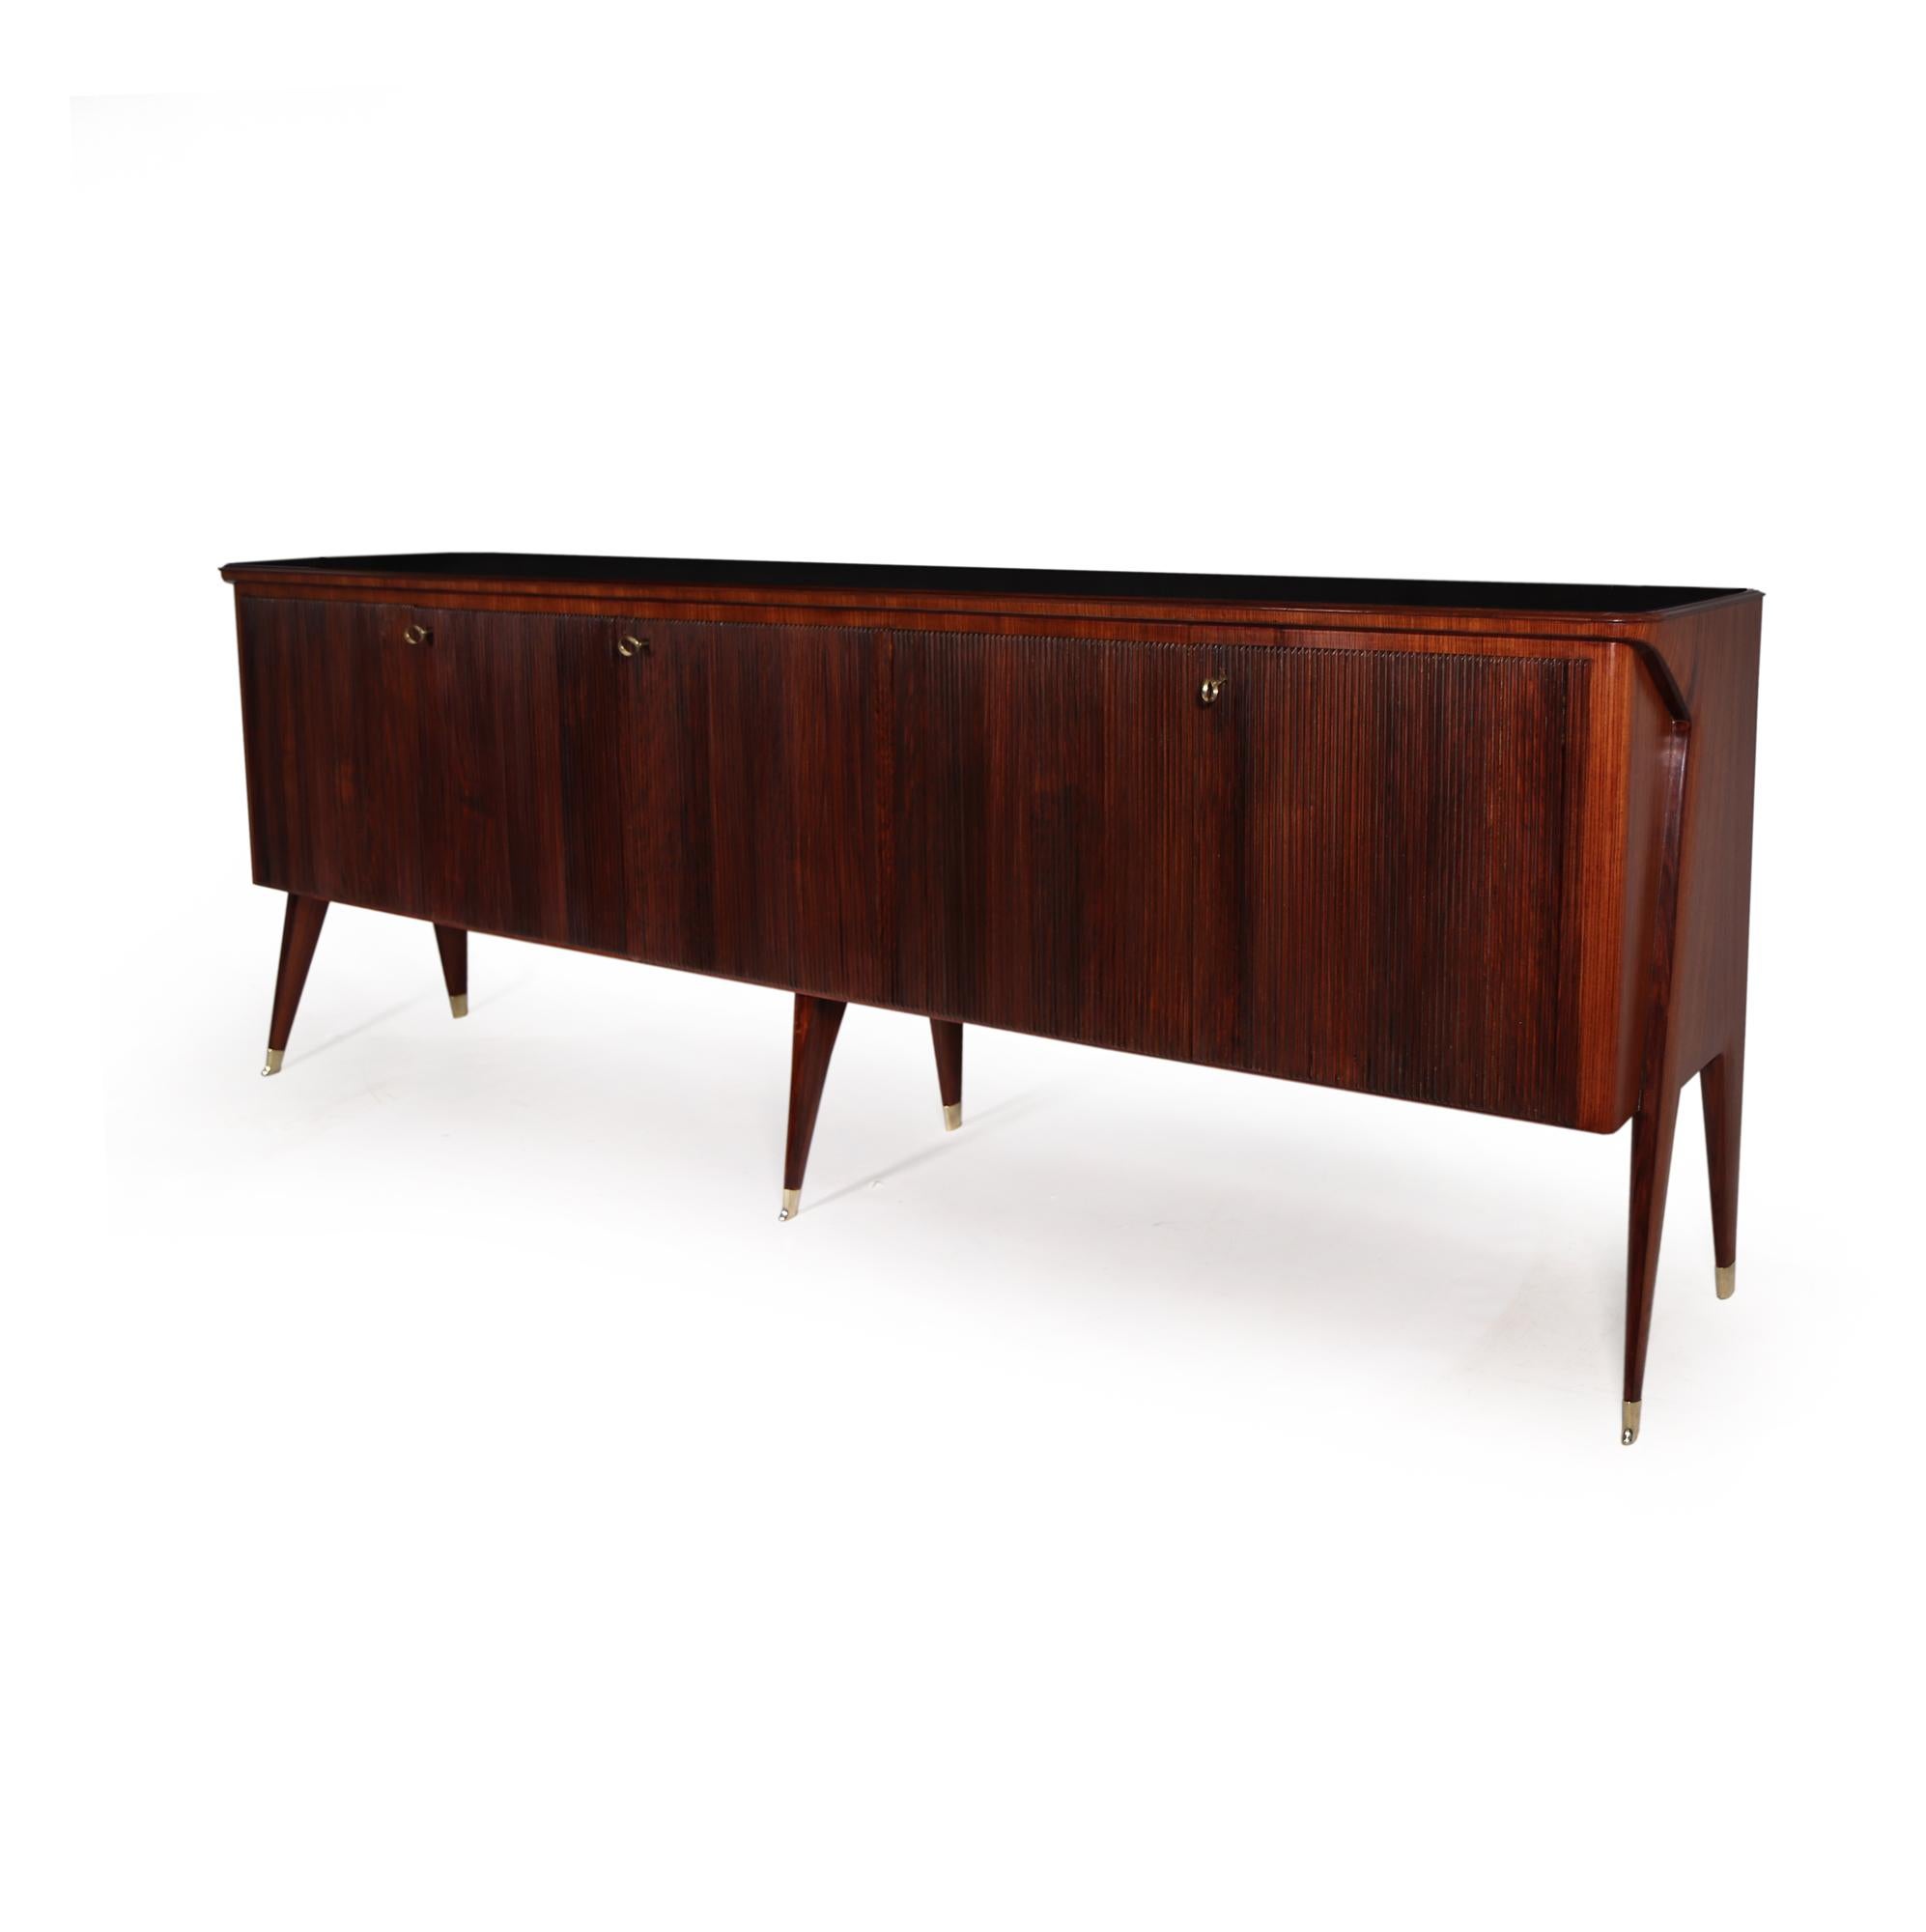 Produced in Italy in the 1950’s with five reeded doors and six legs and having a black glass top and brass sabots this is a large and important sideboard by master craftsman Vittorio Dassi

The sideboard has been fully polished, restored where